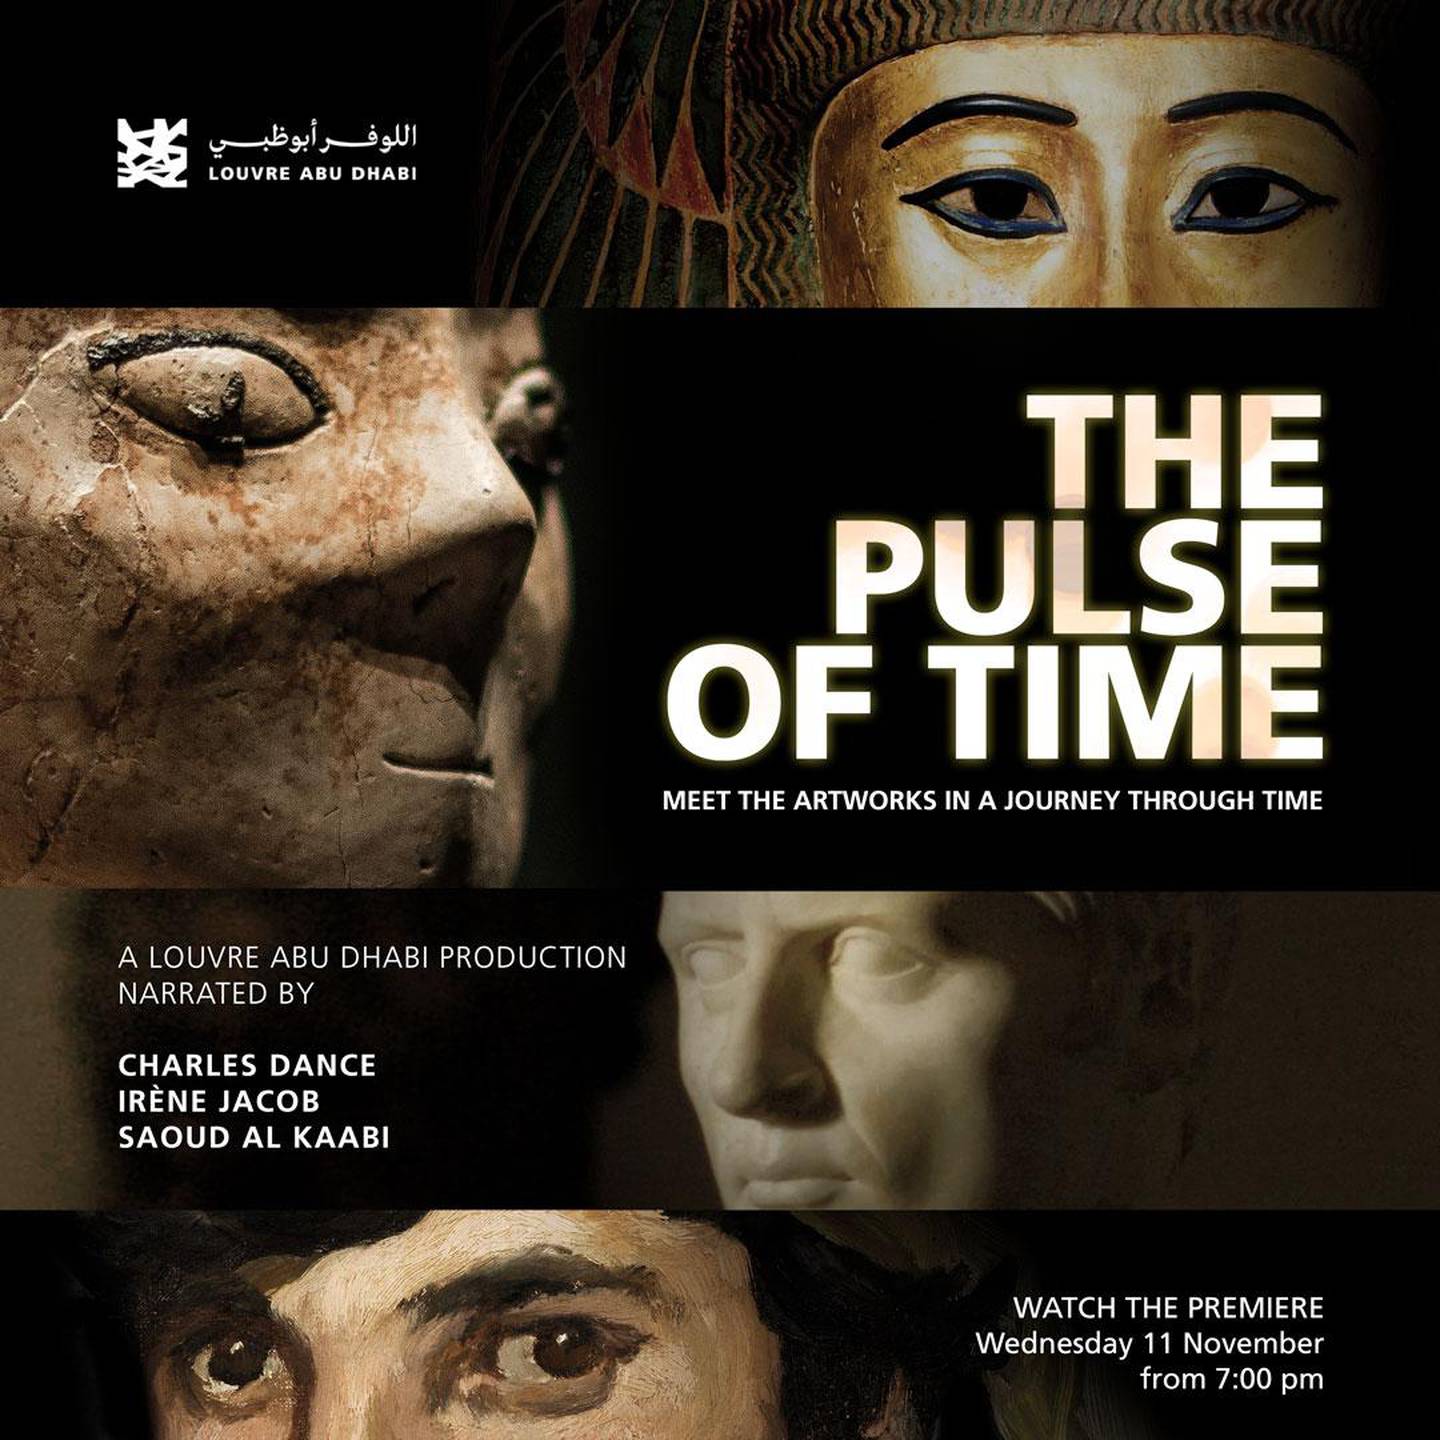 The poster for 'The Pulse of Time' directed by Mohamed Somji for Louvre Abu Dhabi. Louvre Abu Dhabi 